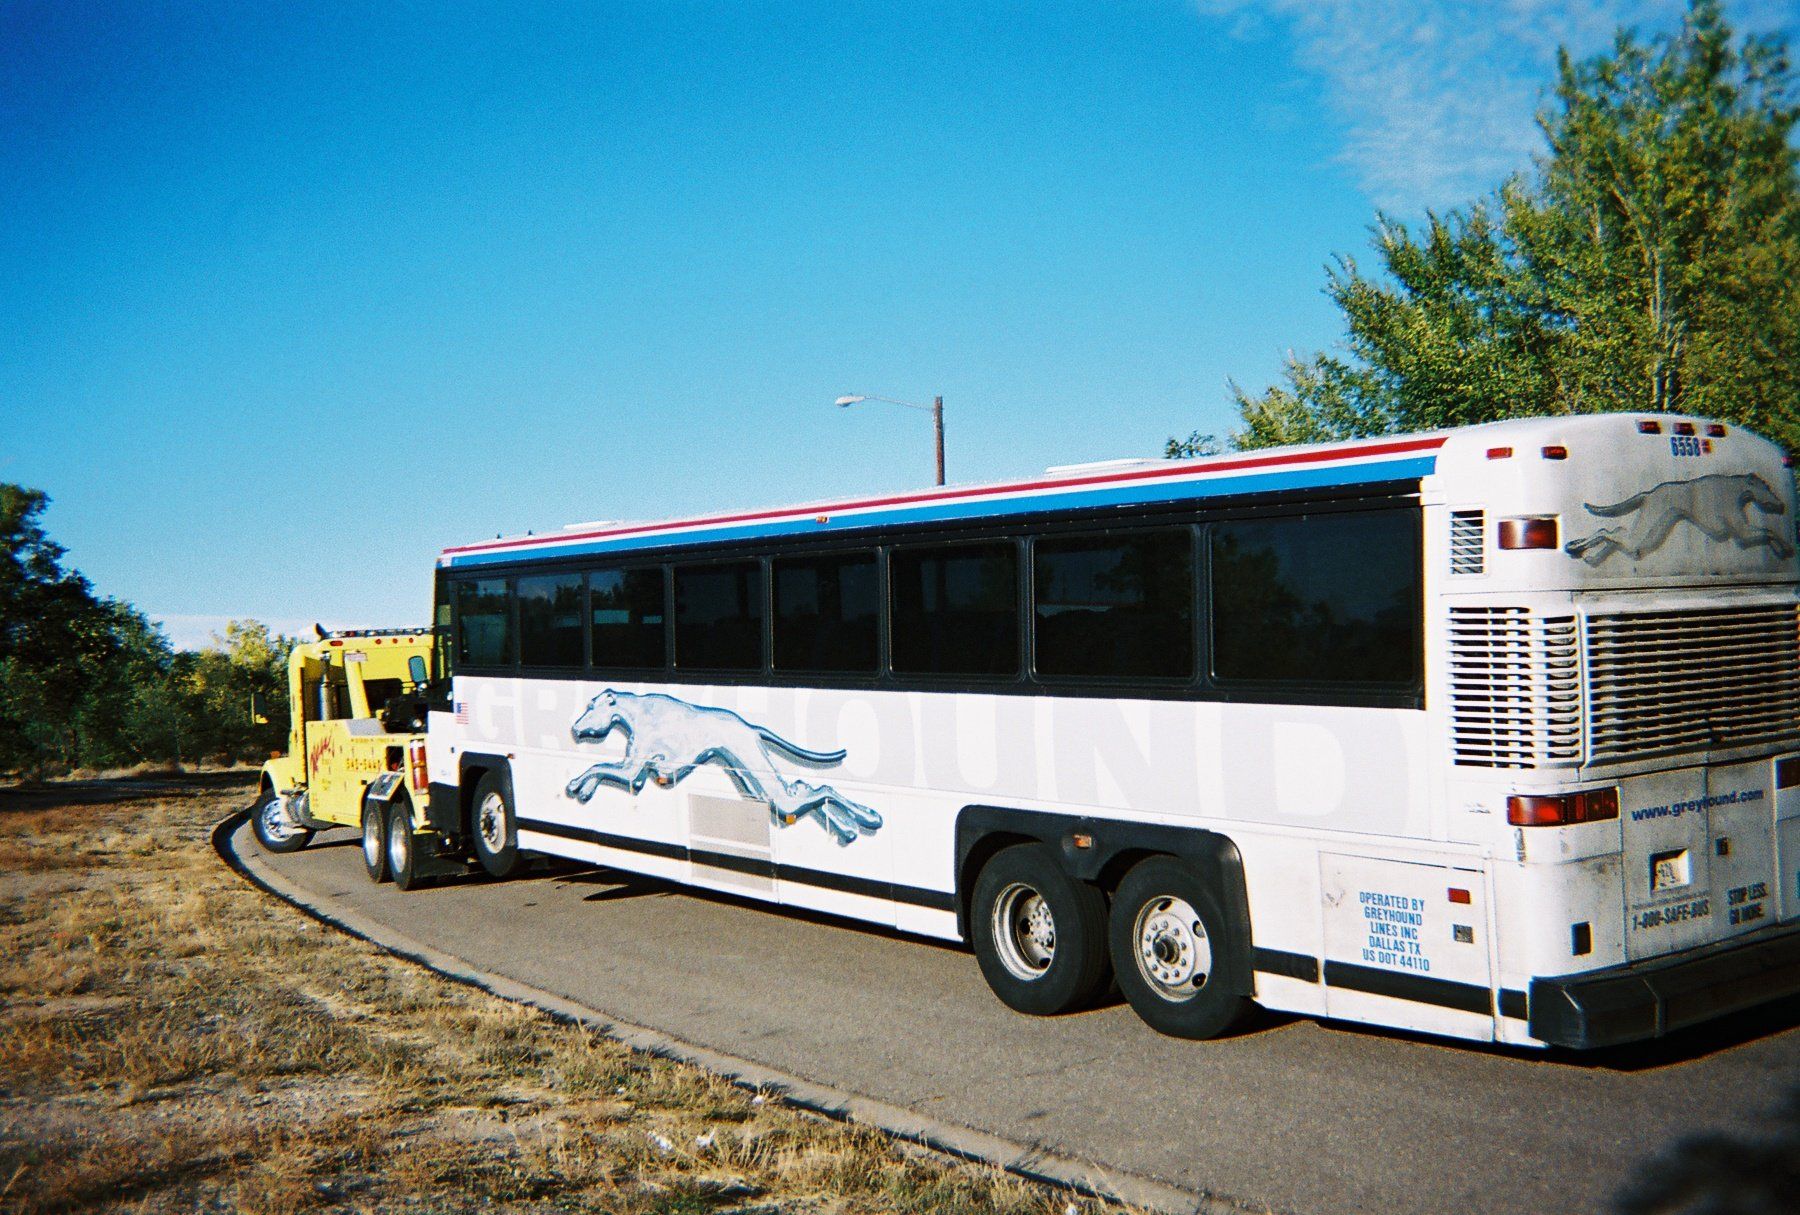 Bus Getting Towed - Towing Services and Emergency Roadside Assistance in Pueblo,CO and the Surrounding Area